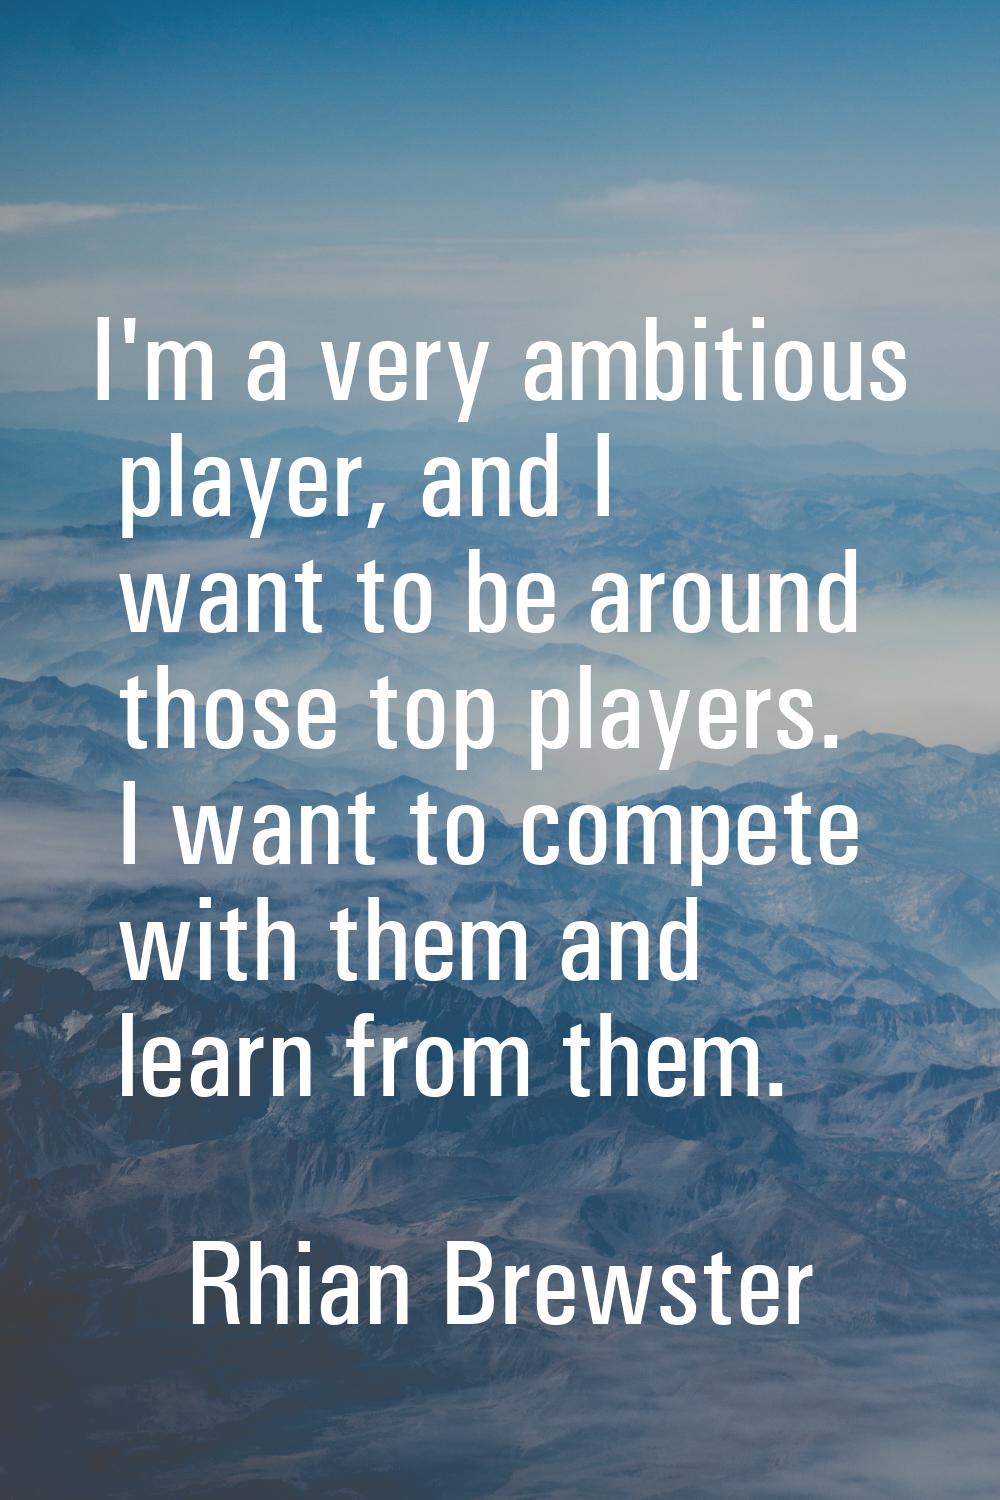 I'm a very ambitious player, and I want to be around those top players. I want to compete with them